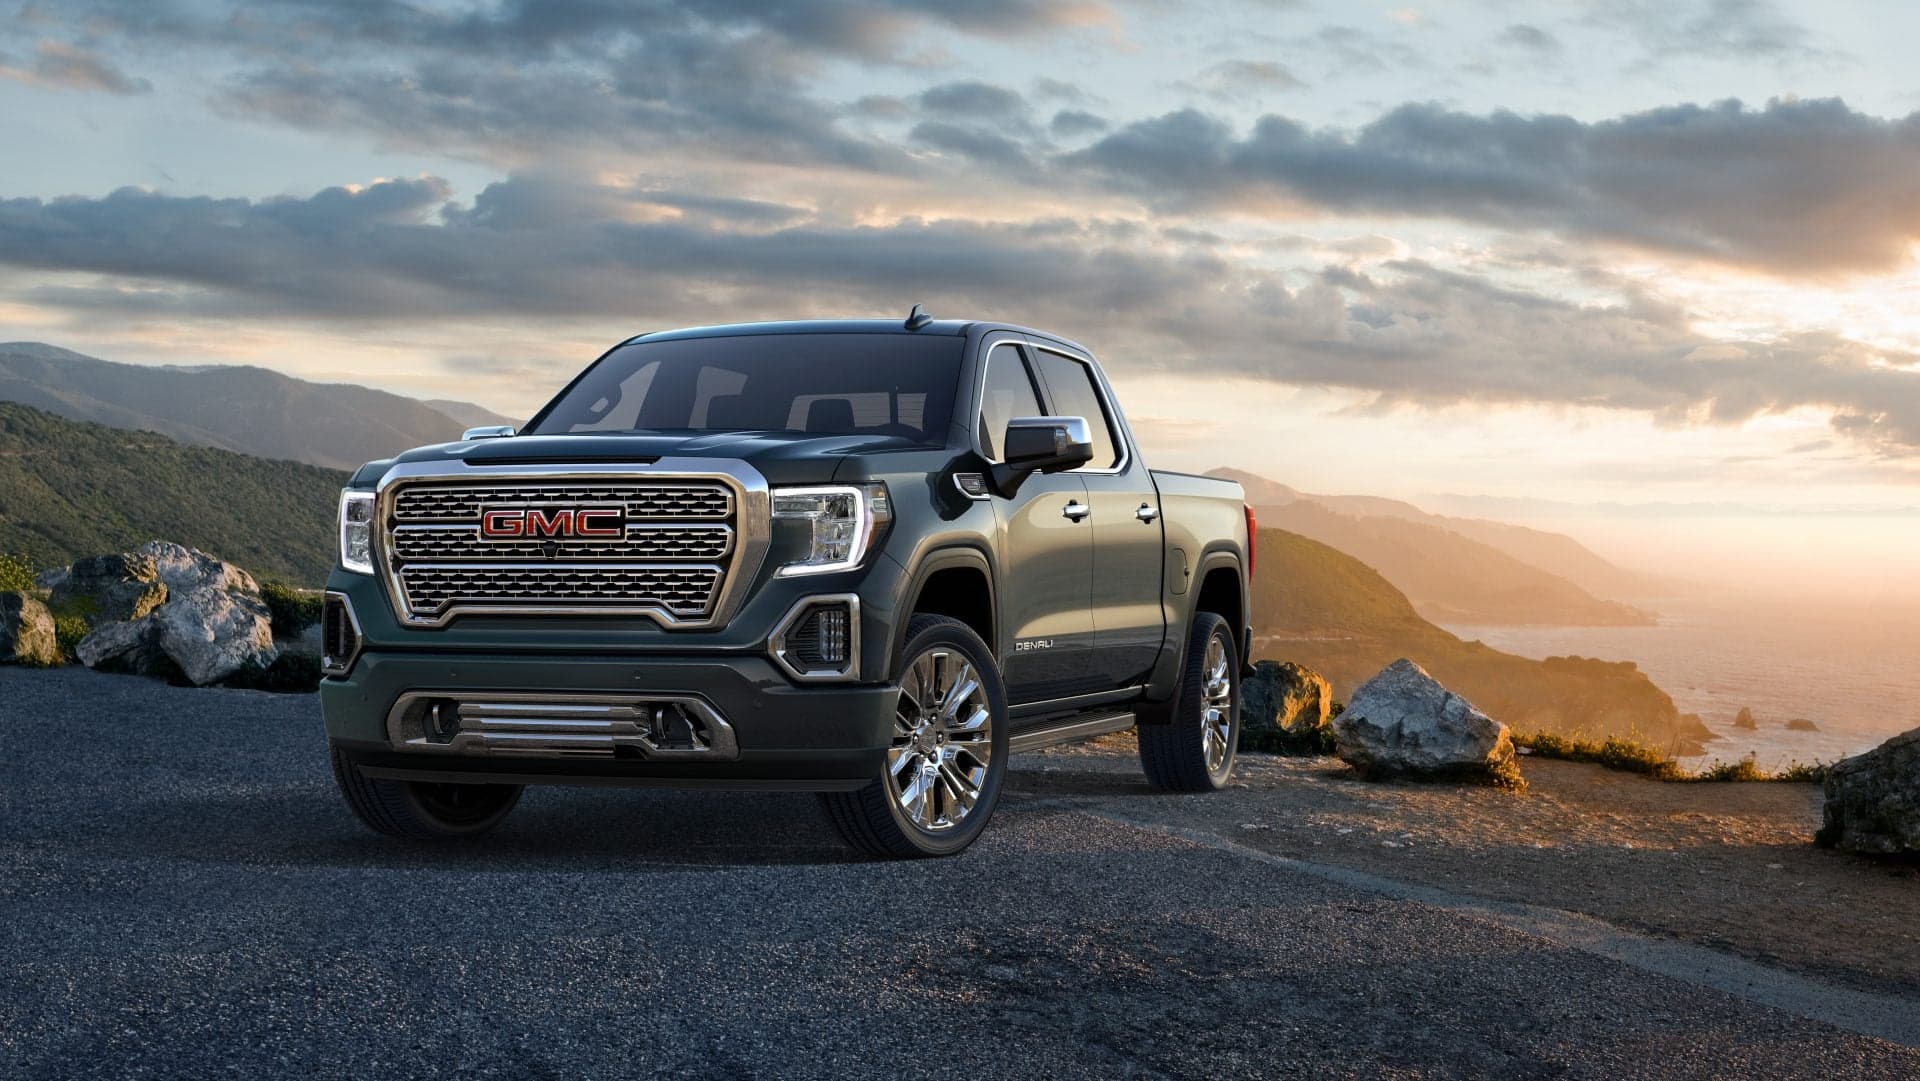 2019 GMC Sierra First Drive Review: GM’s New Truck in Expensive Guise, With Unique Exclusive Options